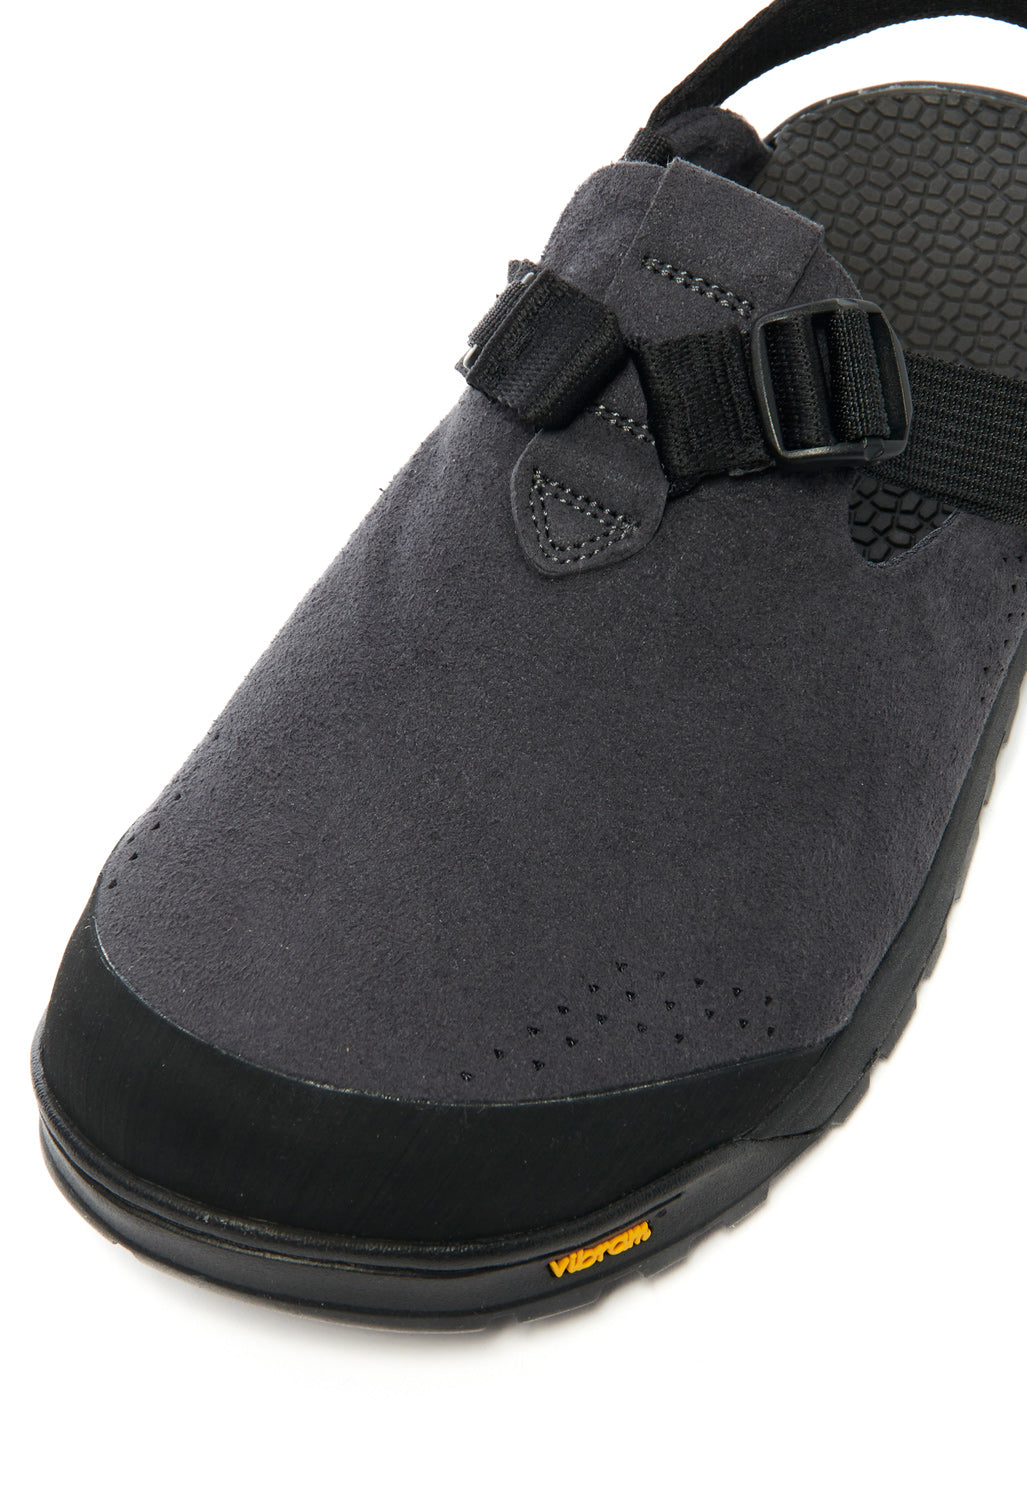 Bedrock Sandals Mountain Clog - Grey Synthetic Suede